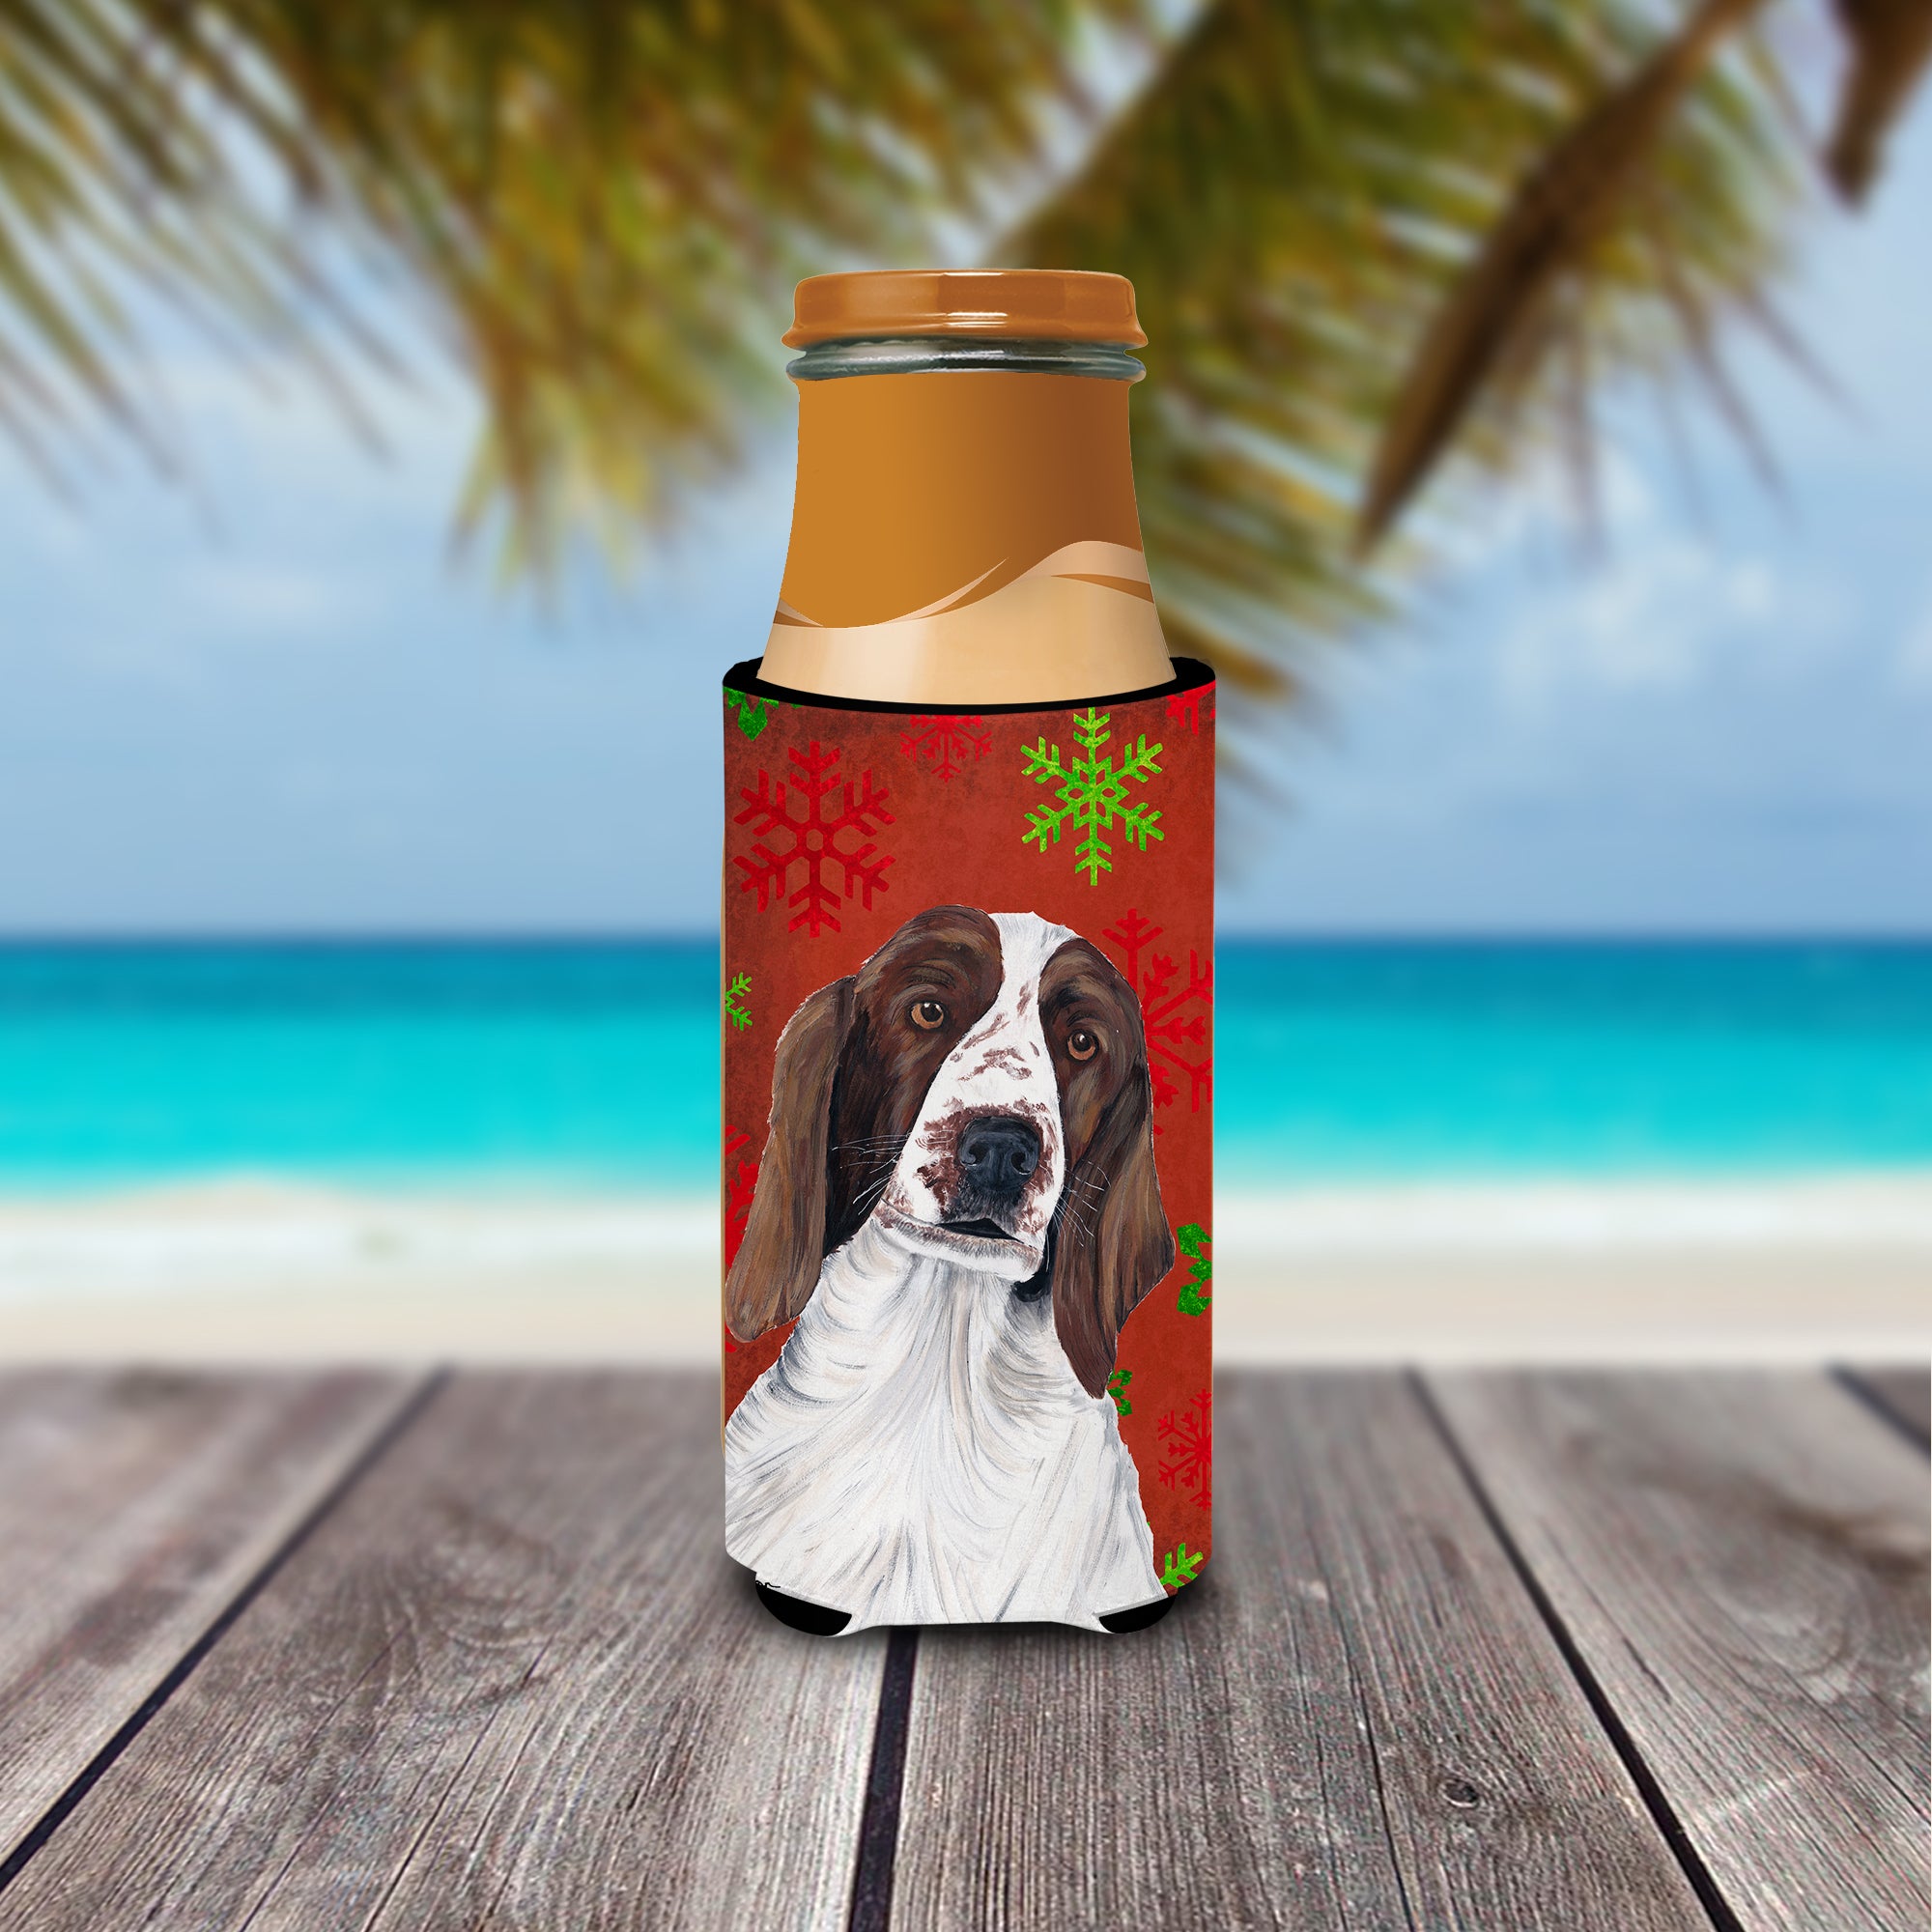 Welsh Springer Spaniel Red  Green Snowflakes Holiday Christmas Ultra Beverage Insulators for slim cans SC9420MUK